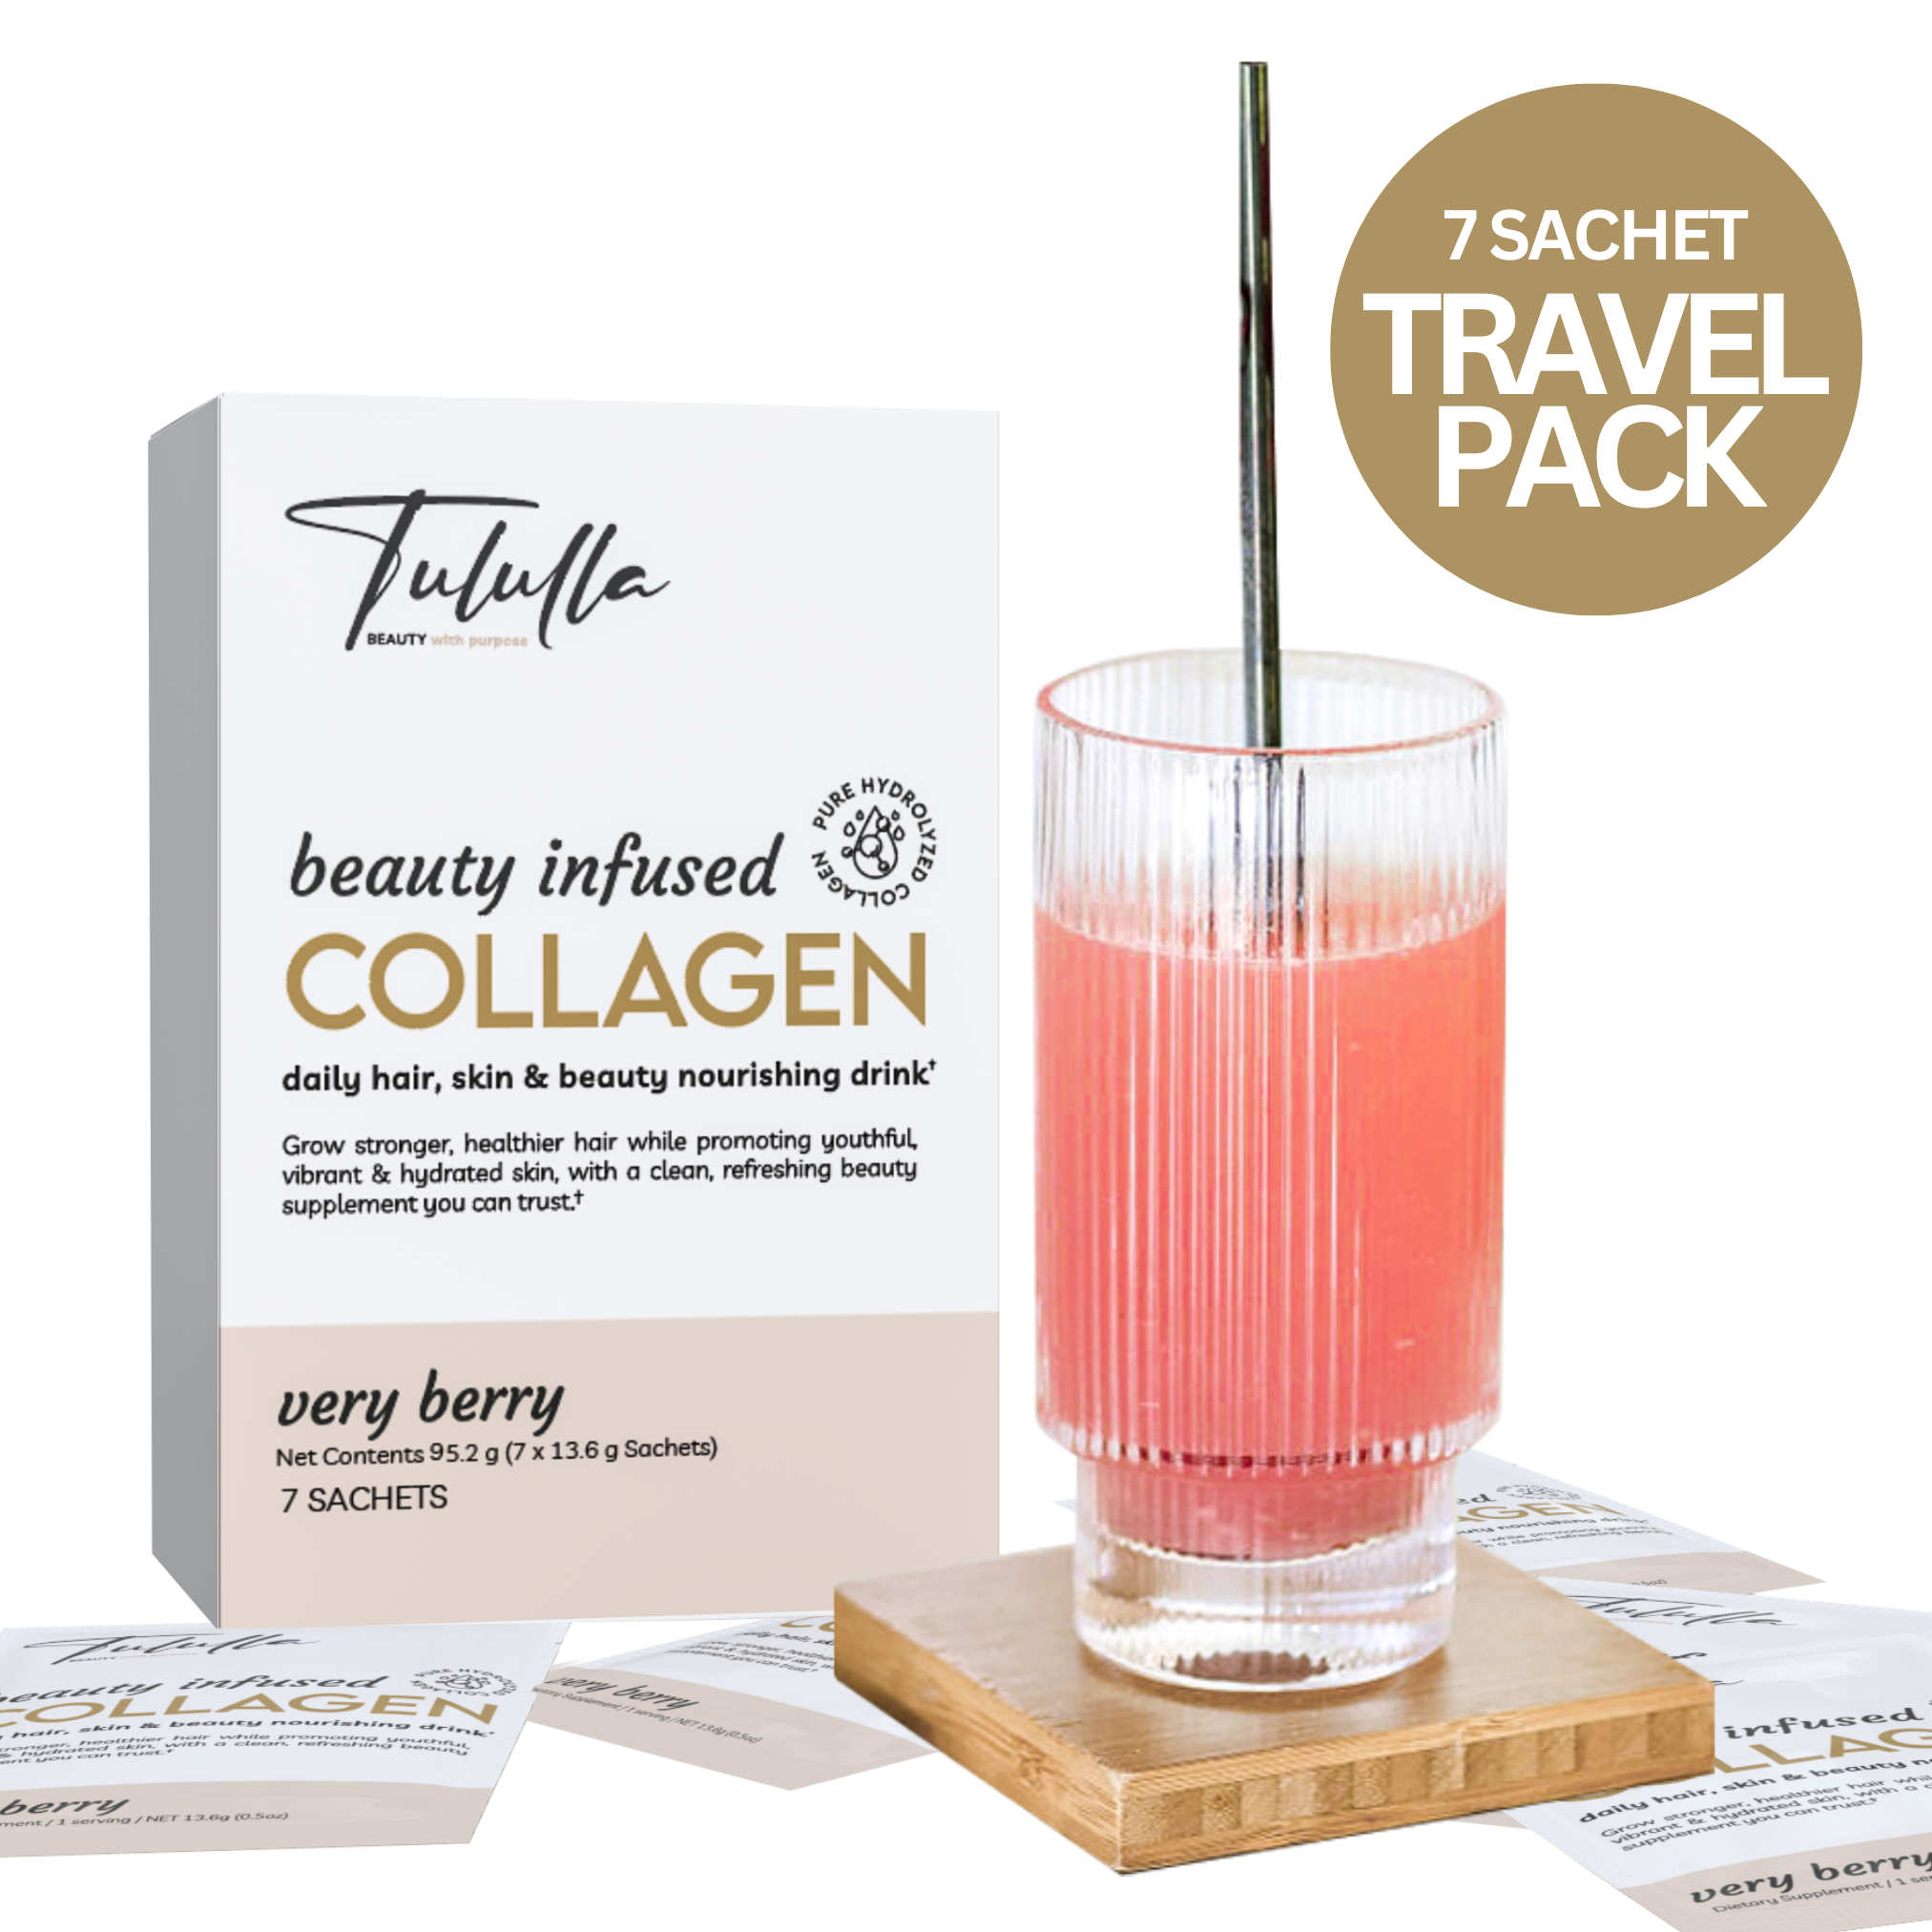 Tululla beauty infused COLLAGEN travel pack of 7.png__PID:6c658756-ba66-4c39-9a1d-f599e04b1807